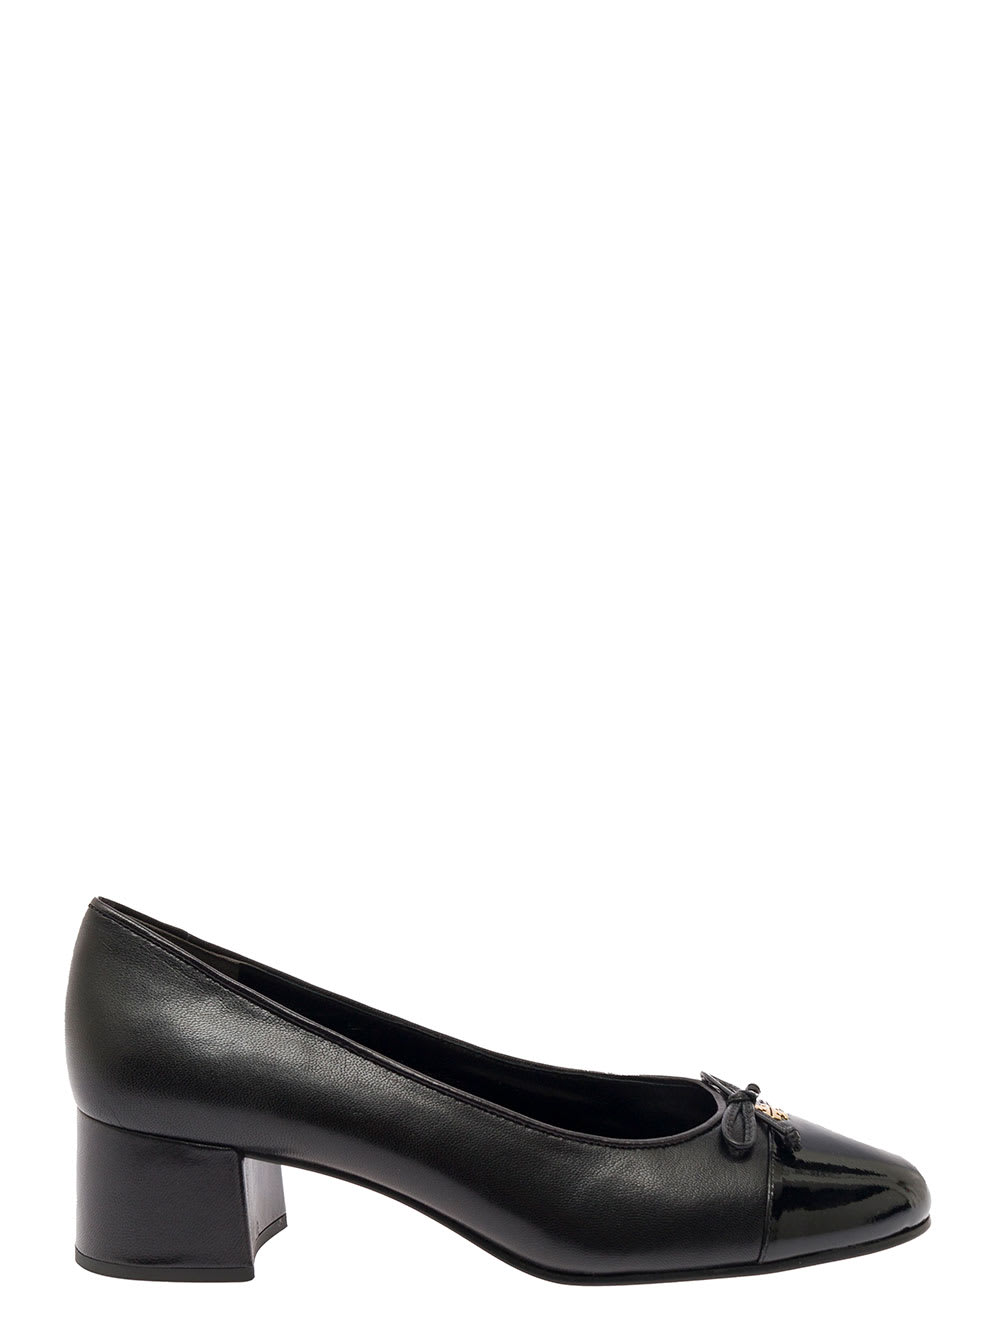 Tory Burch Black Pumps With Bow And Logo Detail In Leather Woman